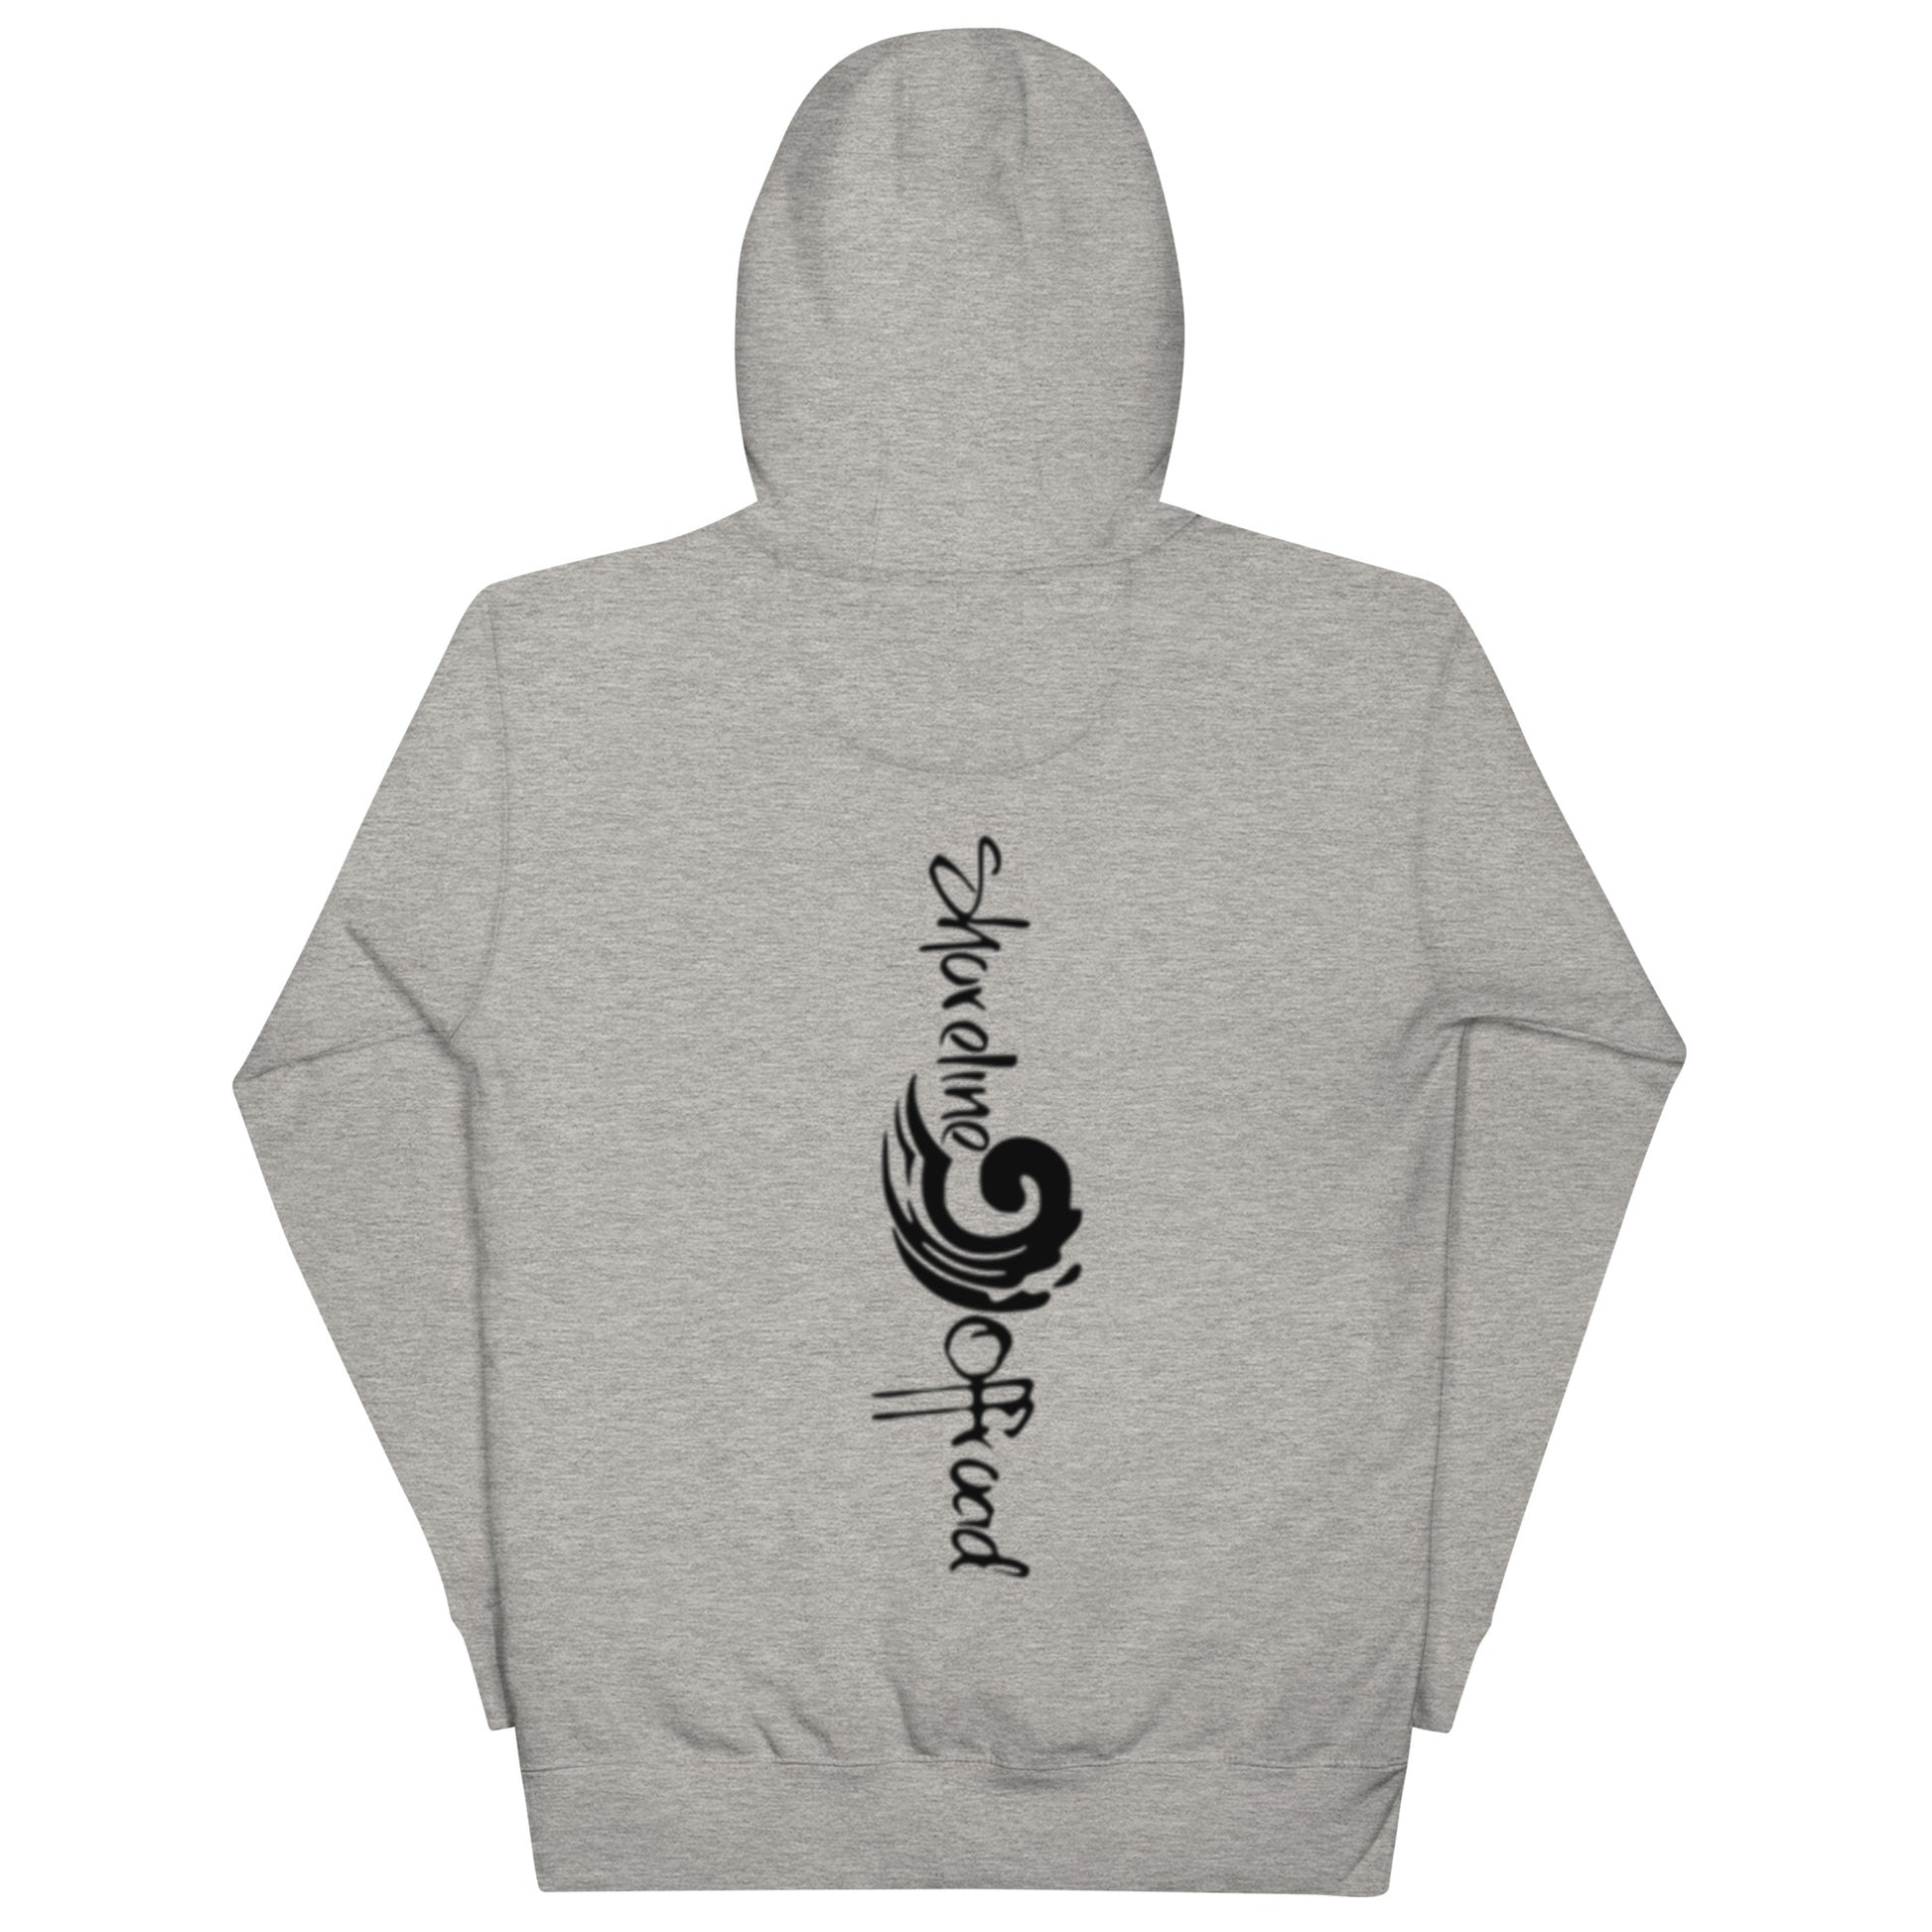 a grey hoodie with a black and white design on it